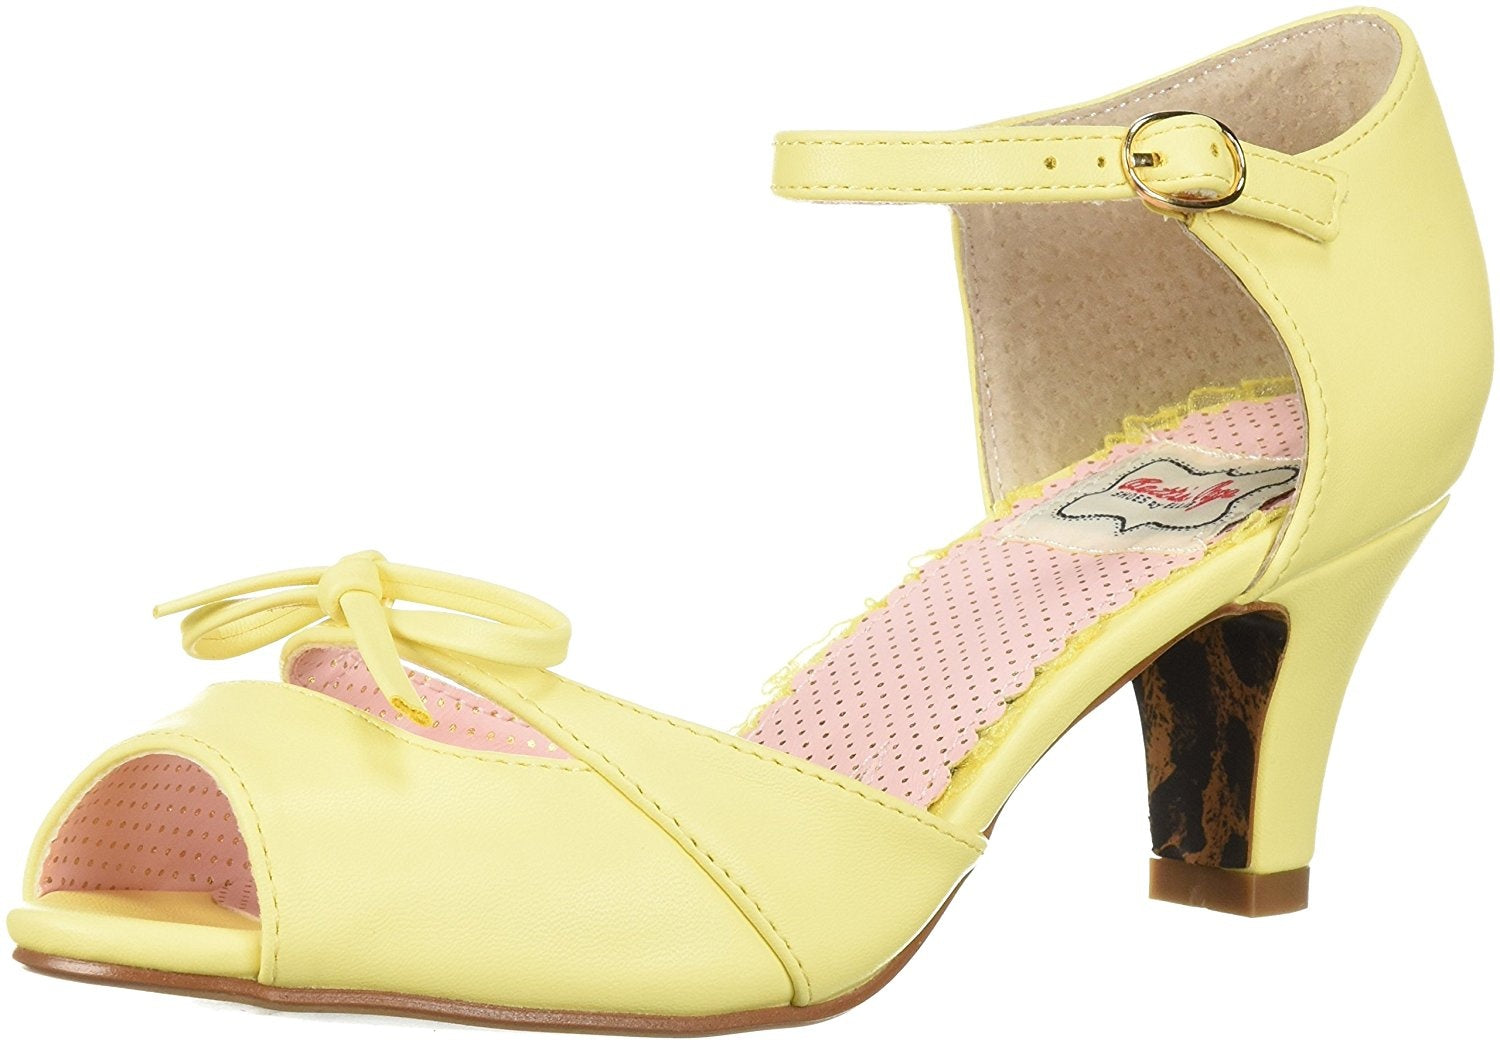 Bettie Page Shoes Tegan Yellow Sandals